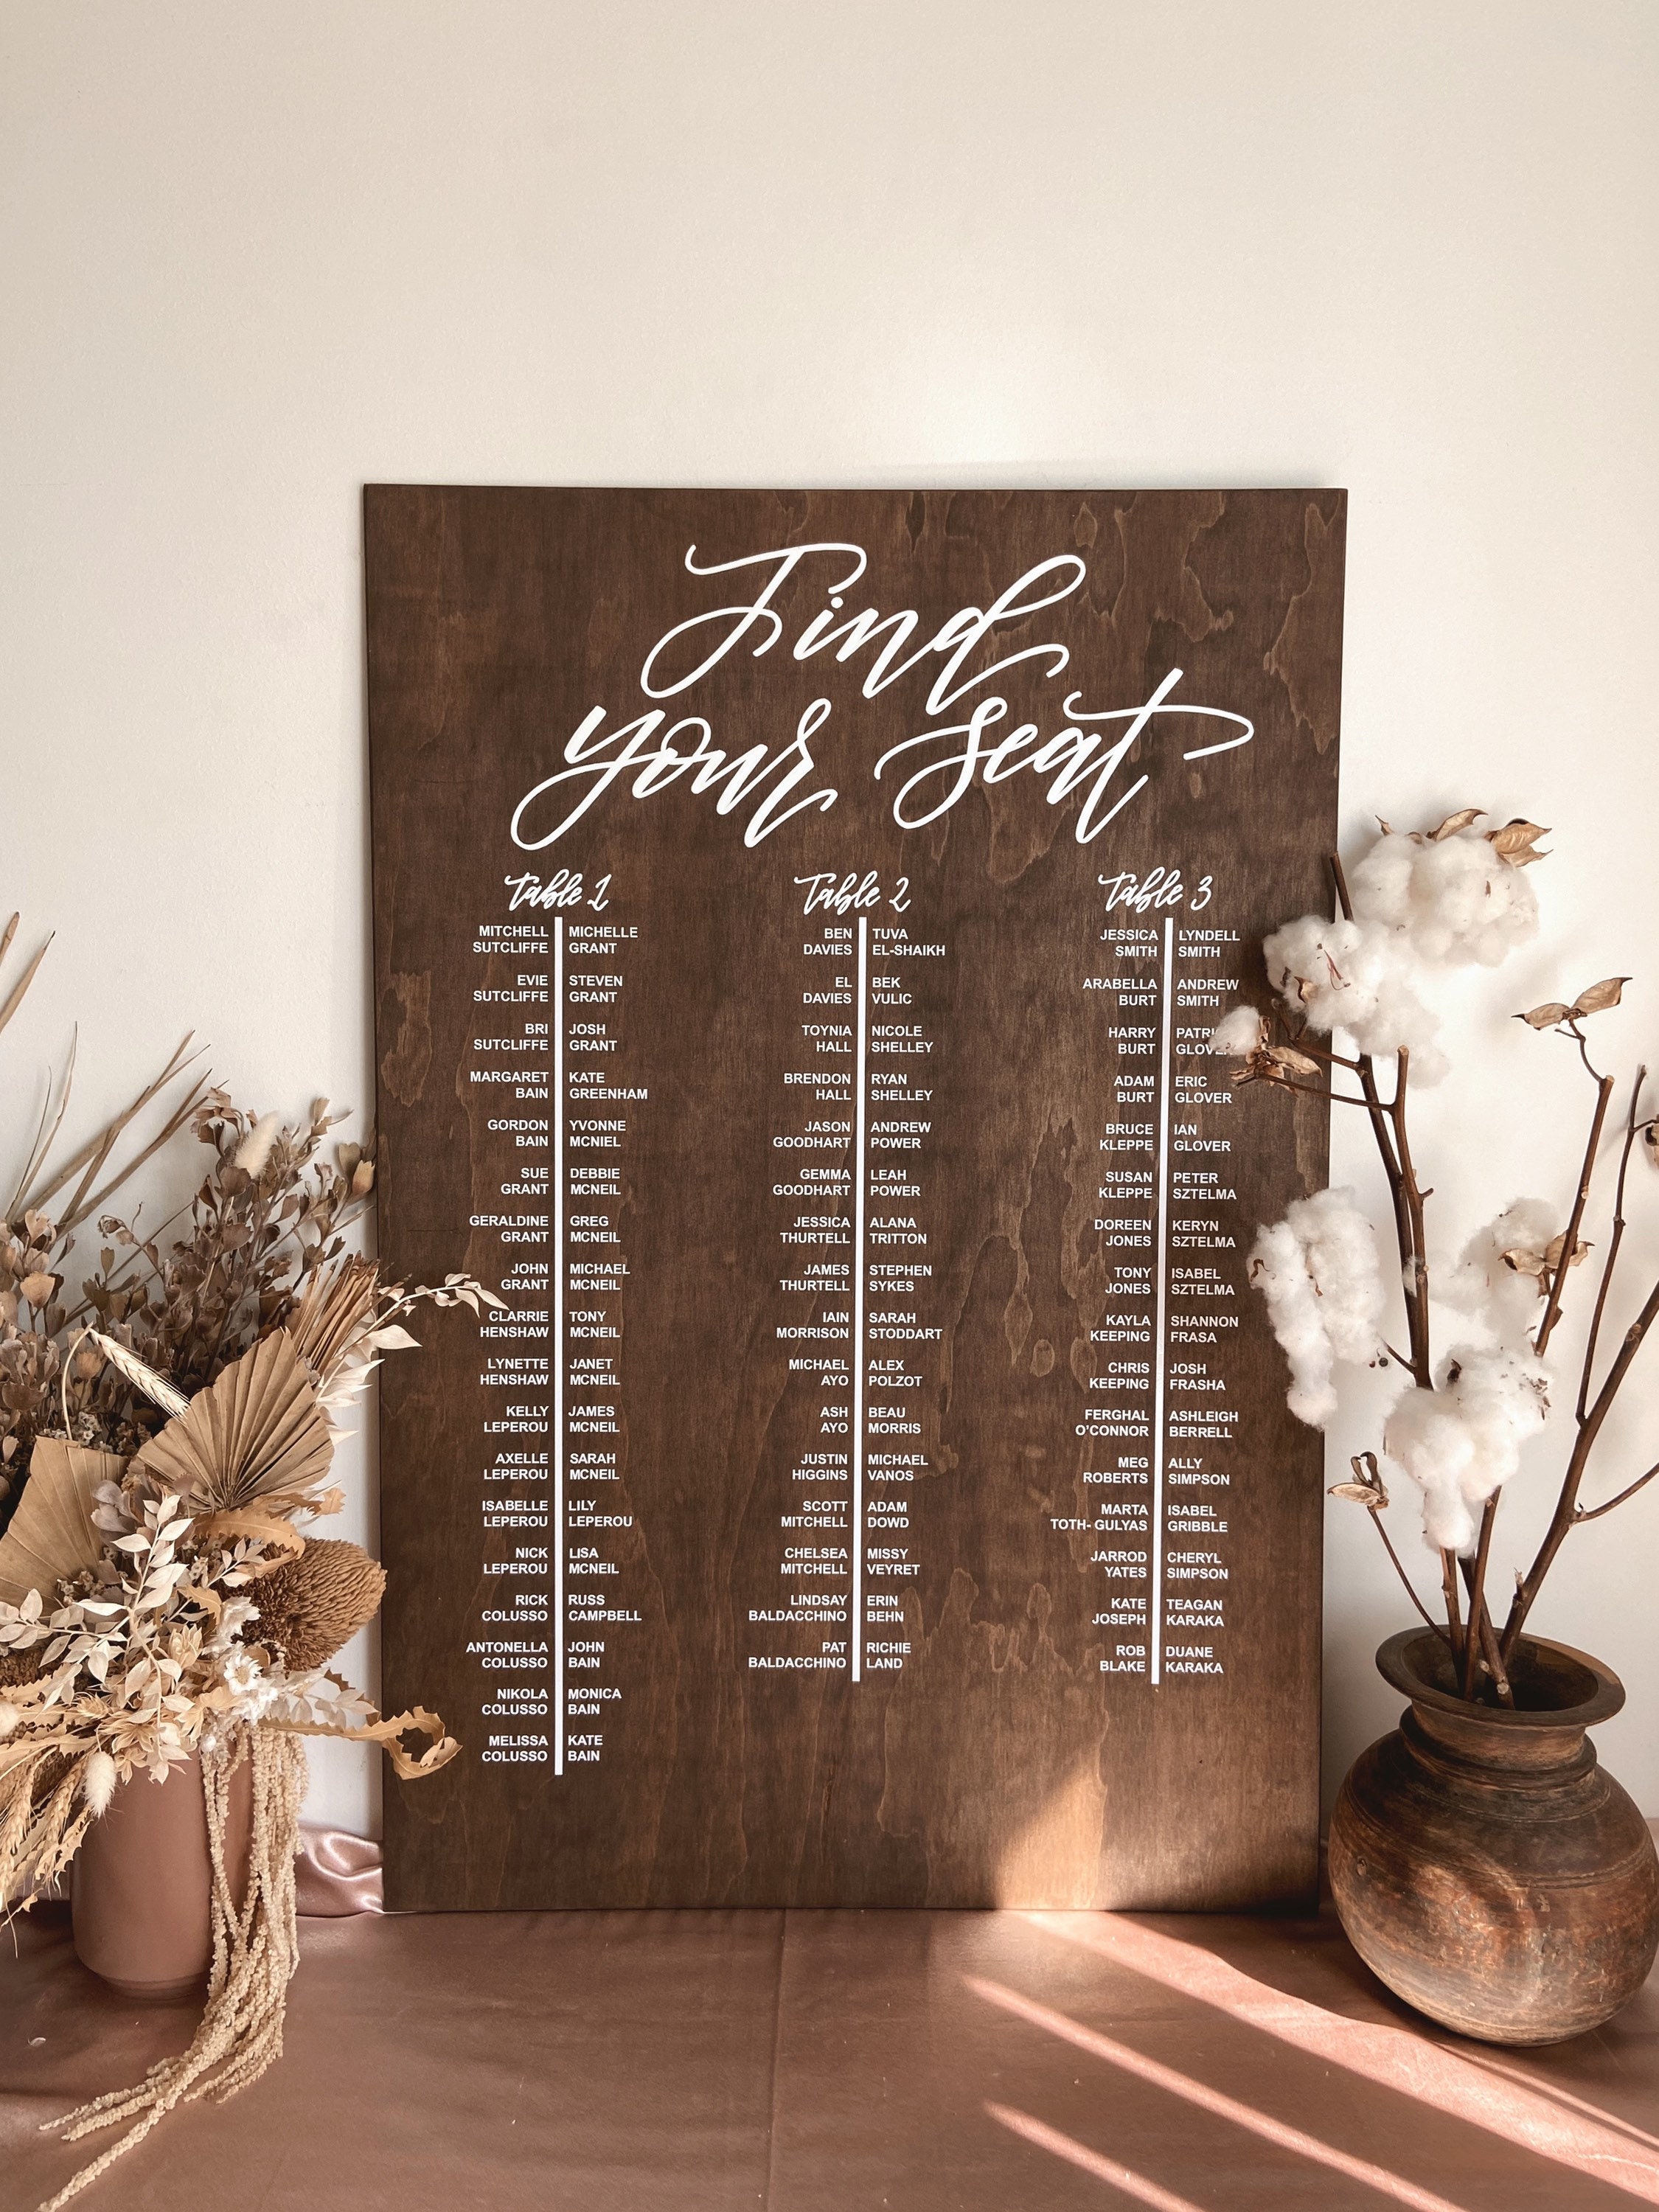  Please find your seat - Wedding Signage - 8x10 PRINT - Unframed  - Reception - RUSTIC - Sign - Recycled - Eco Friendly : Handmade Products